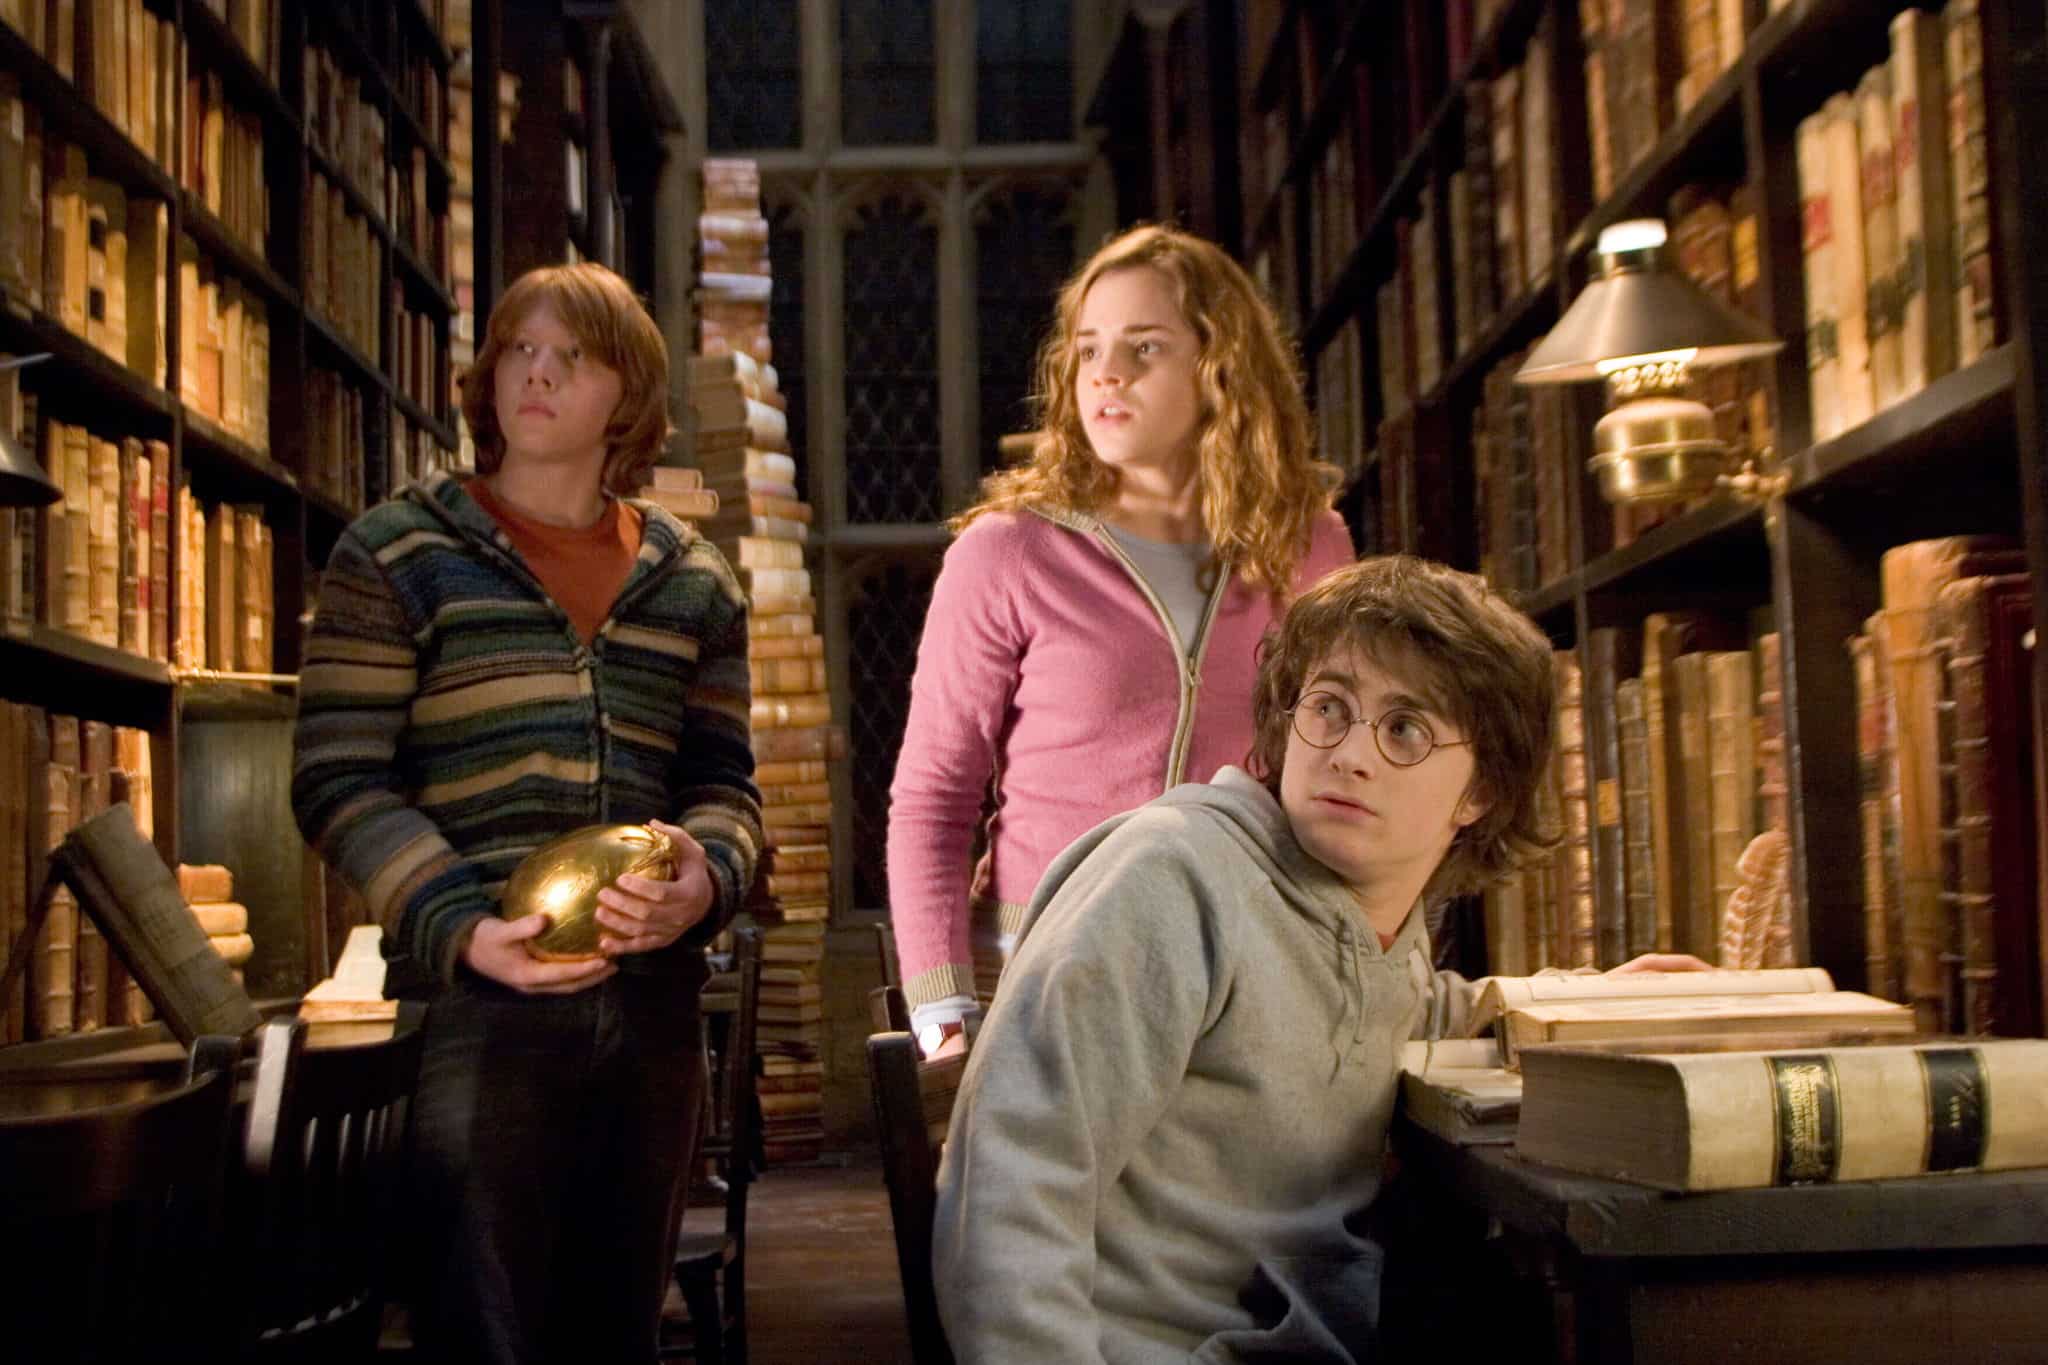 7 Shows and Movies to Watch If You’re a Potterhead